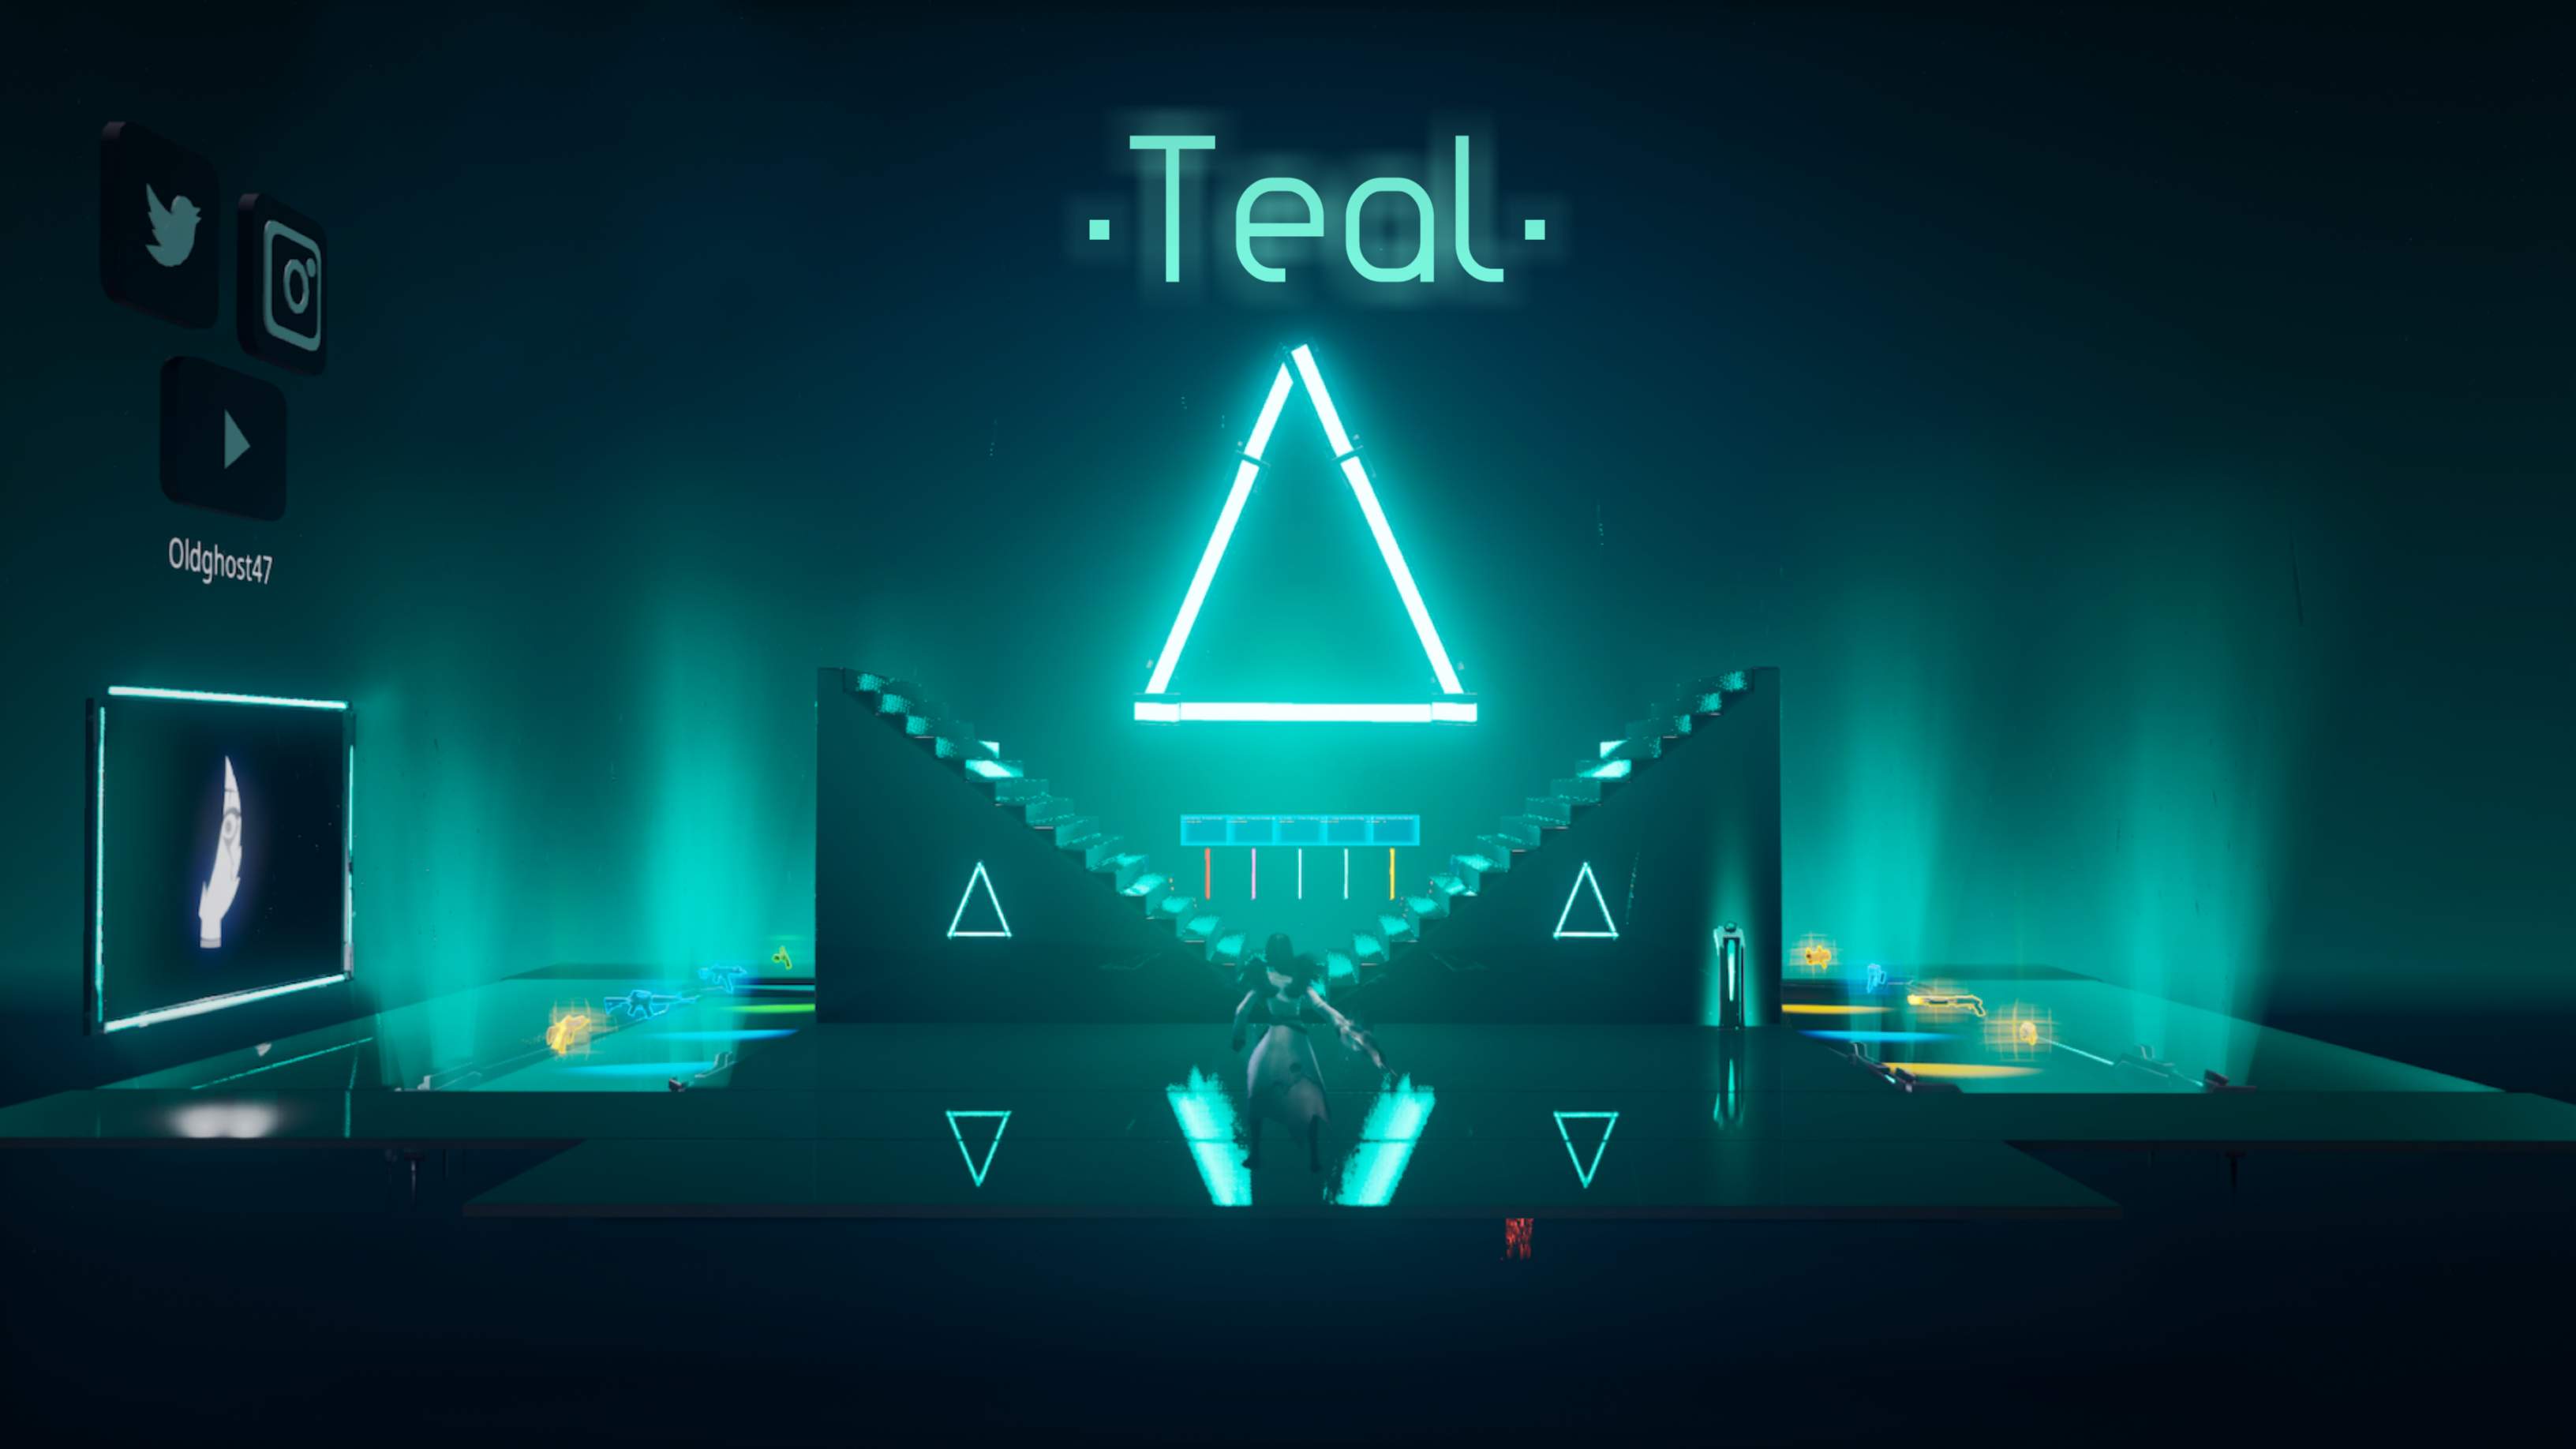 CLEAN TRIANGLE: 1V1 •NO DELAY• [TEAL]